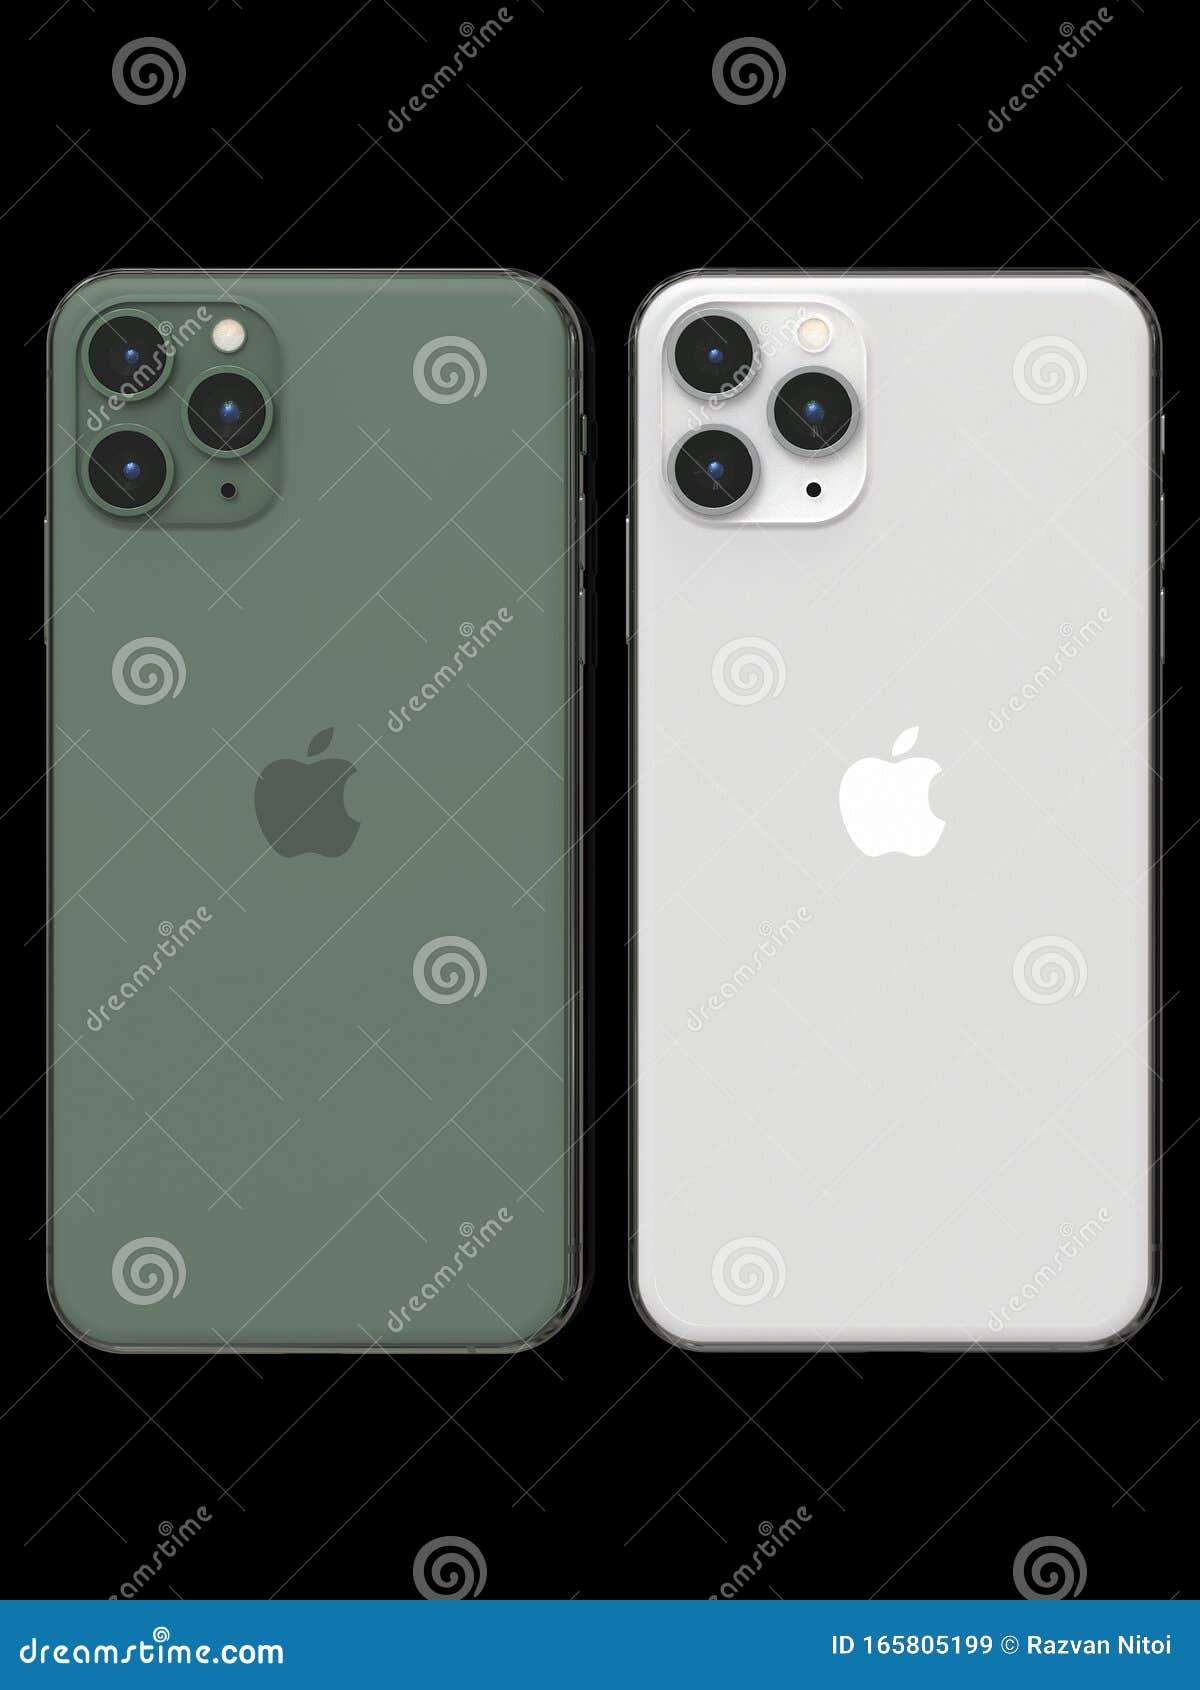 Apple Iphone 11 Pro 2 Colors Compared Side By Side Editorial Stock Image Image Of Device Apps